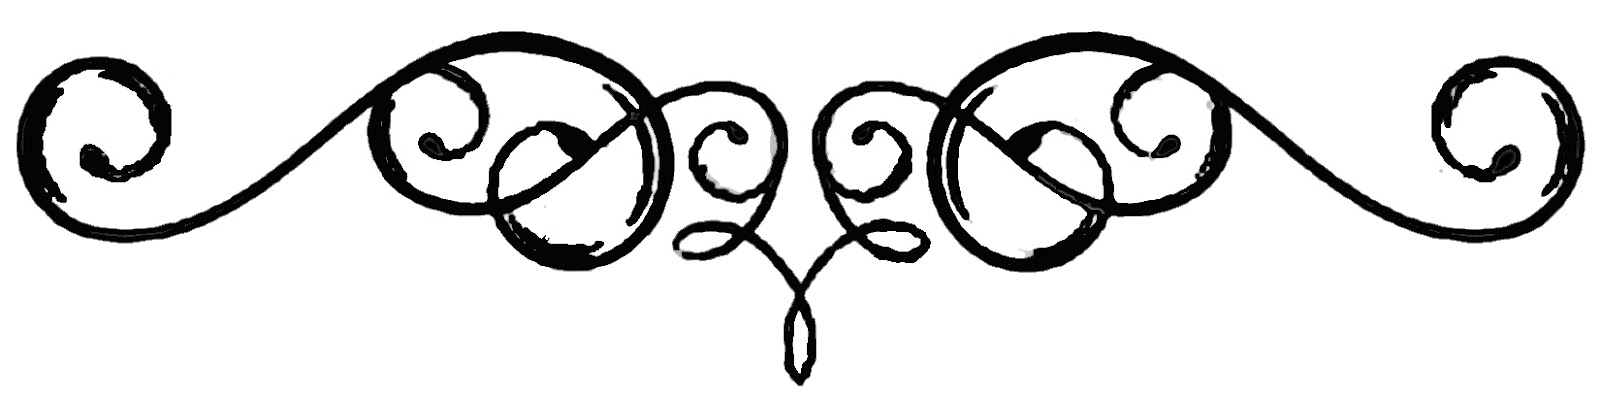 Free Black Scroll Cliparts, Download Free Clip Art, Free.